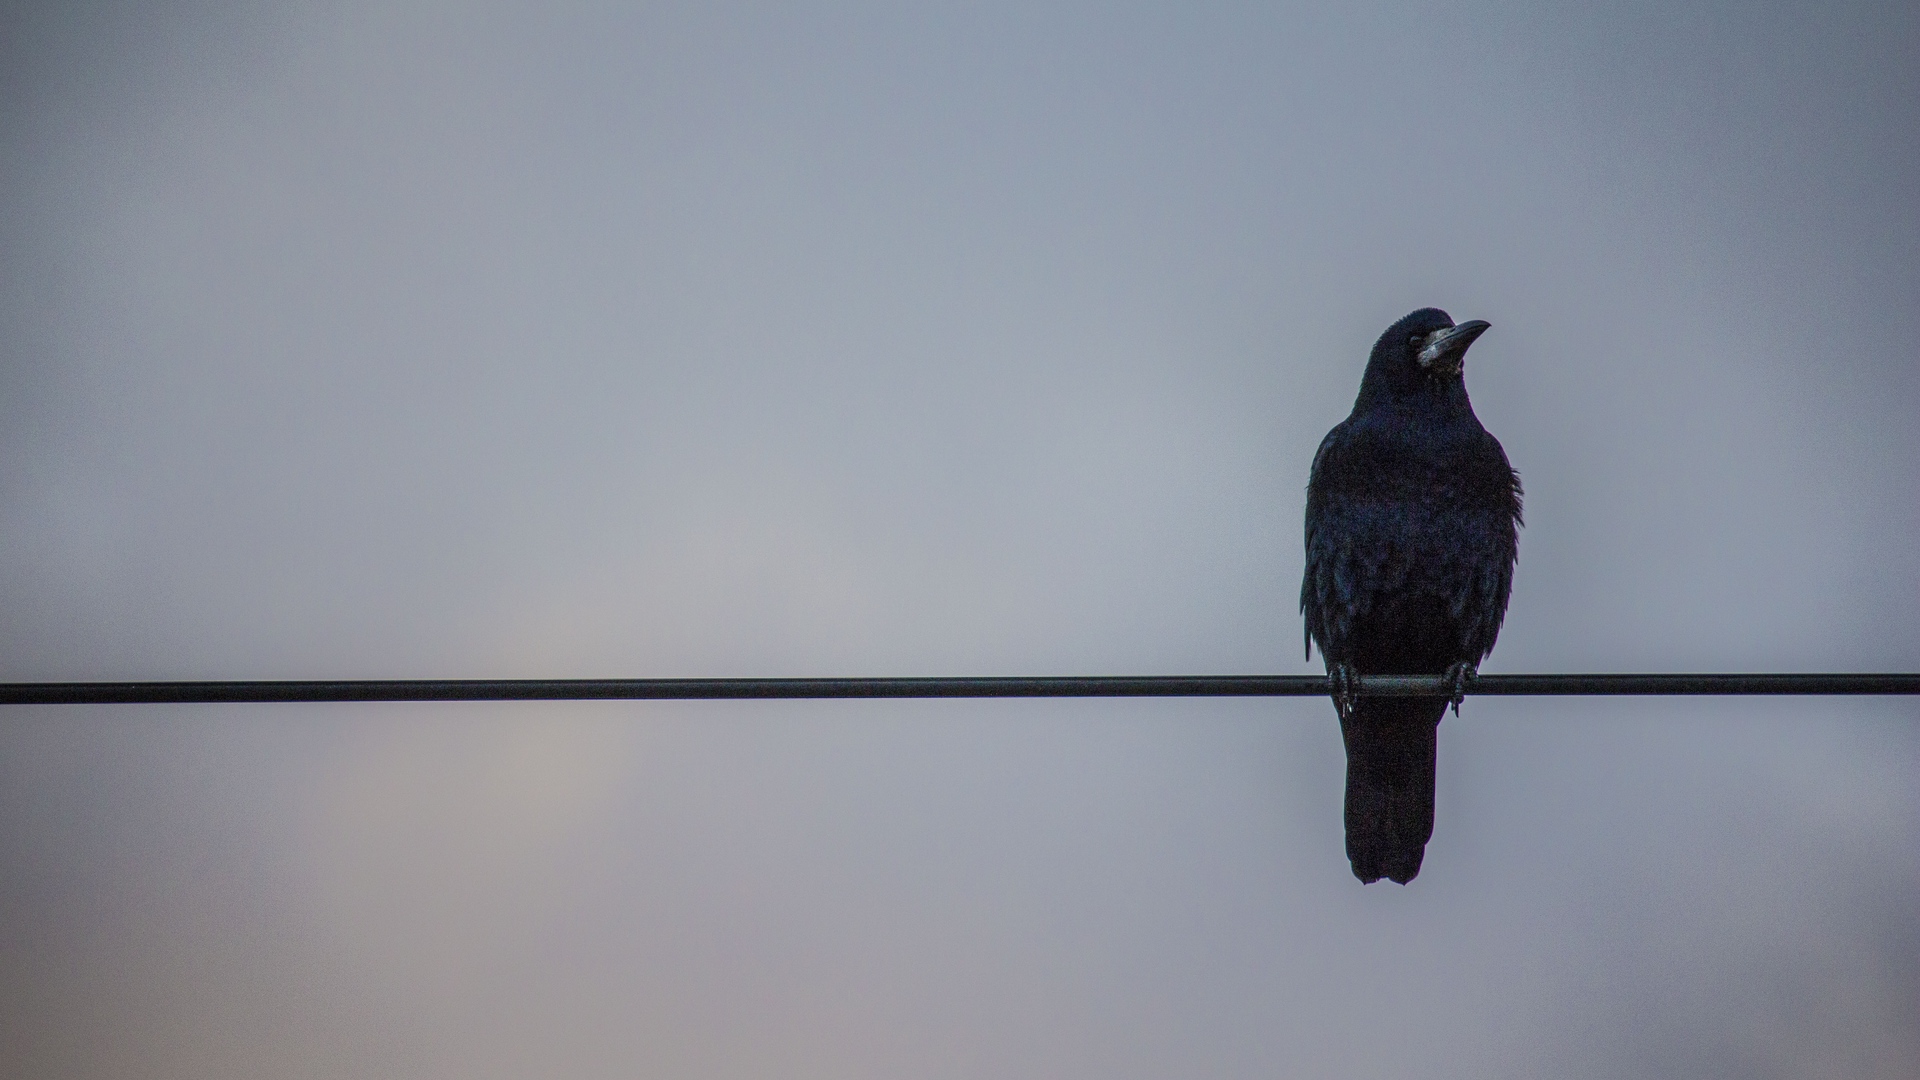 Wallpaper Crows, Wires, Birds - Lonely Crow - HD Wallpaper 